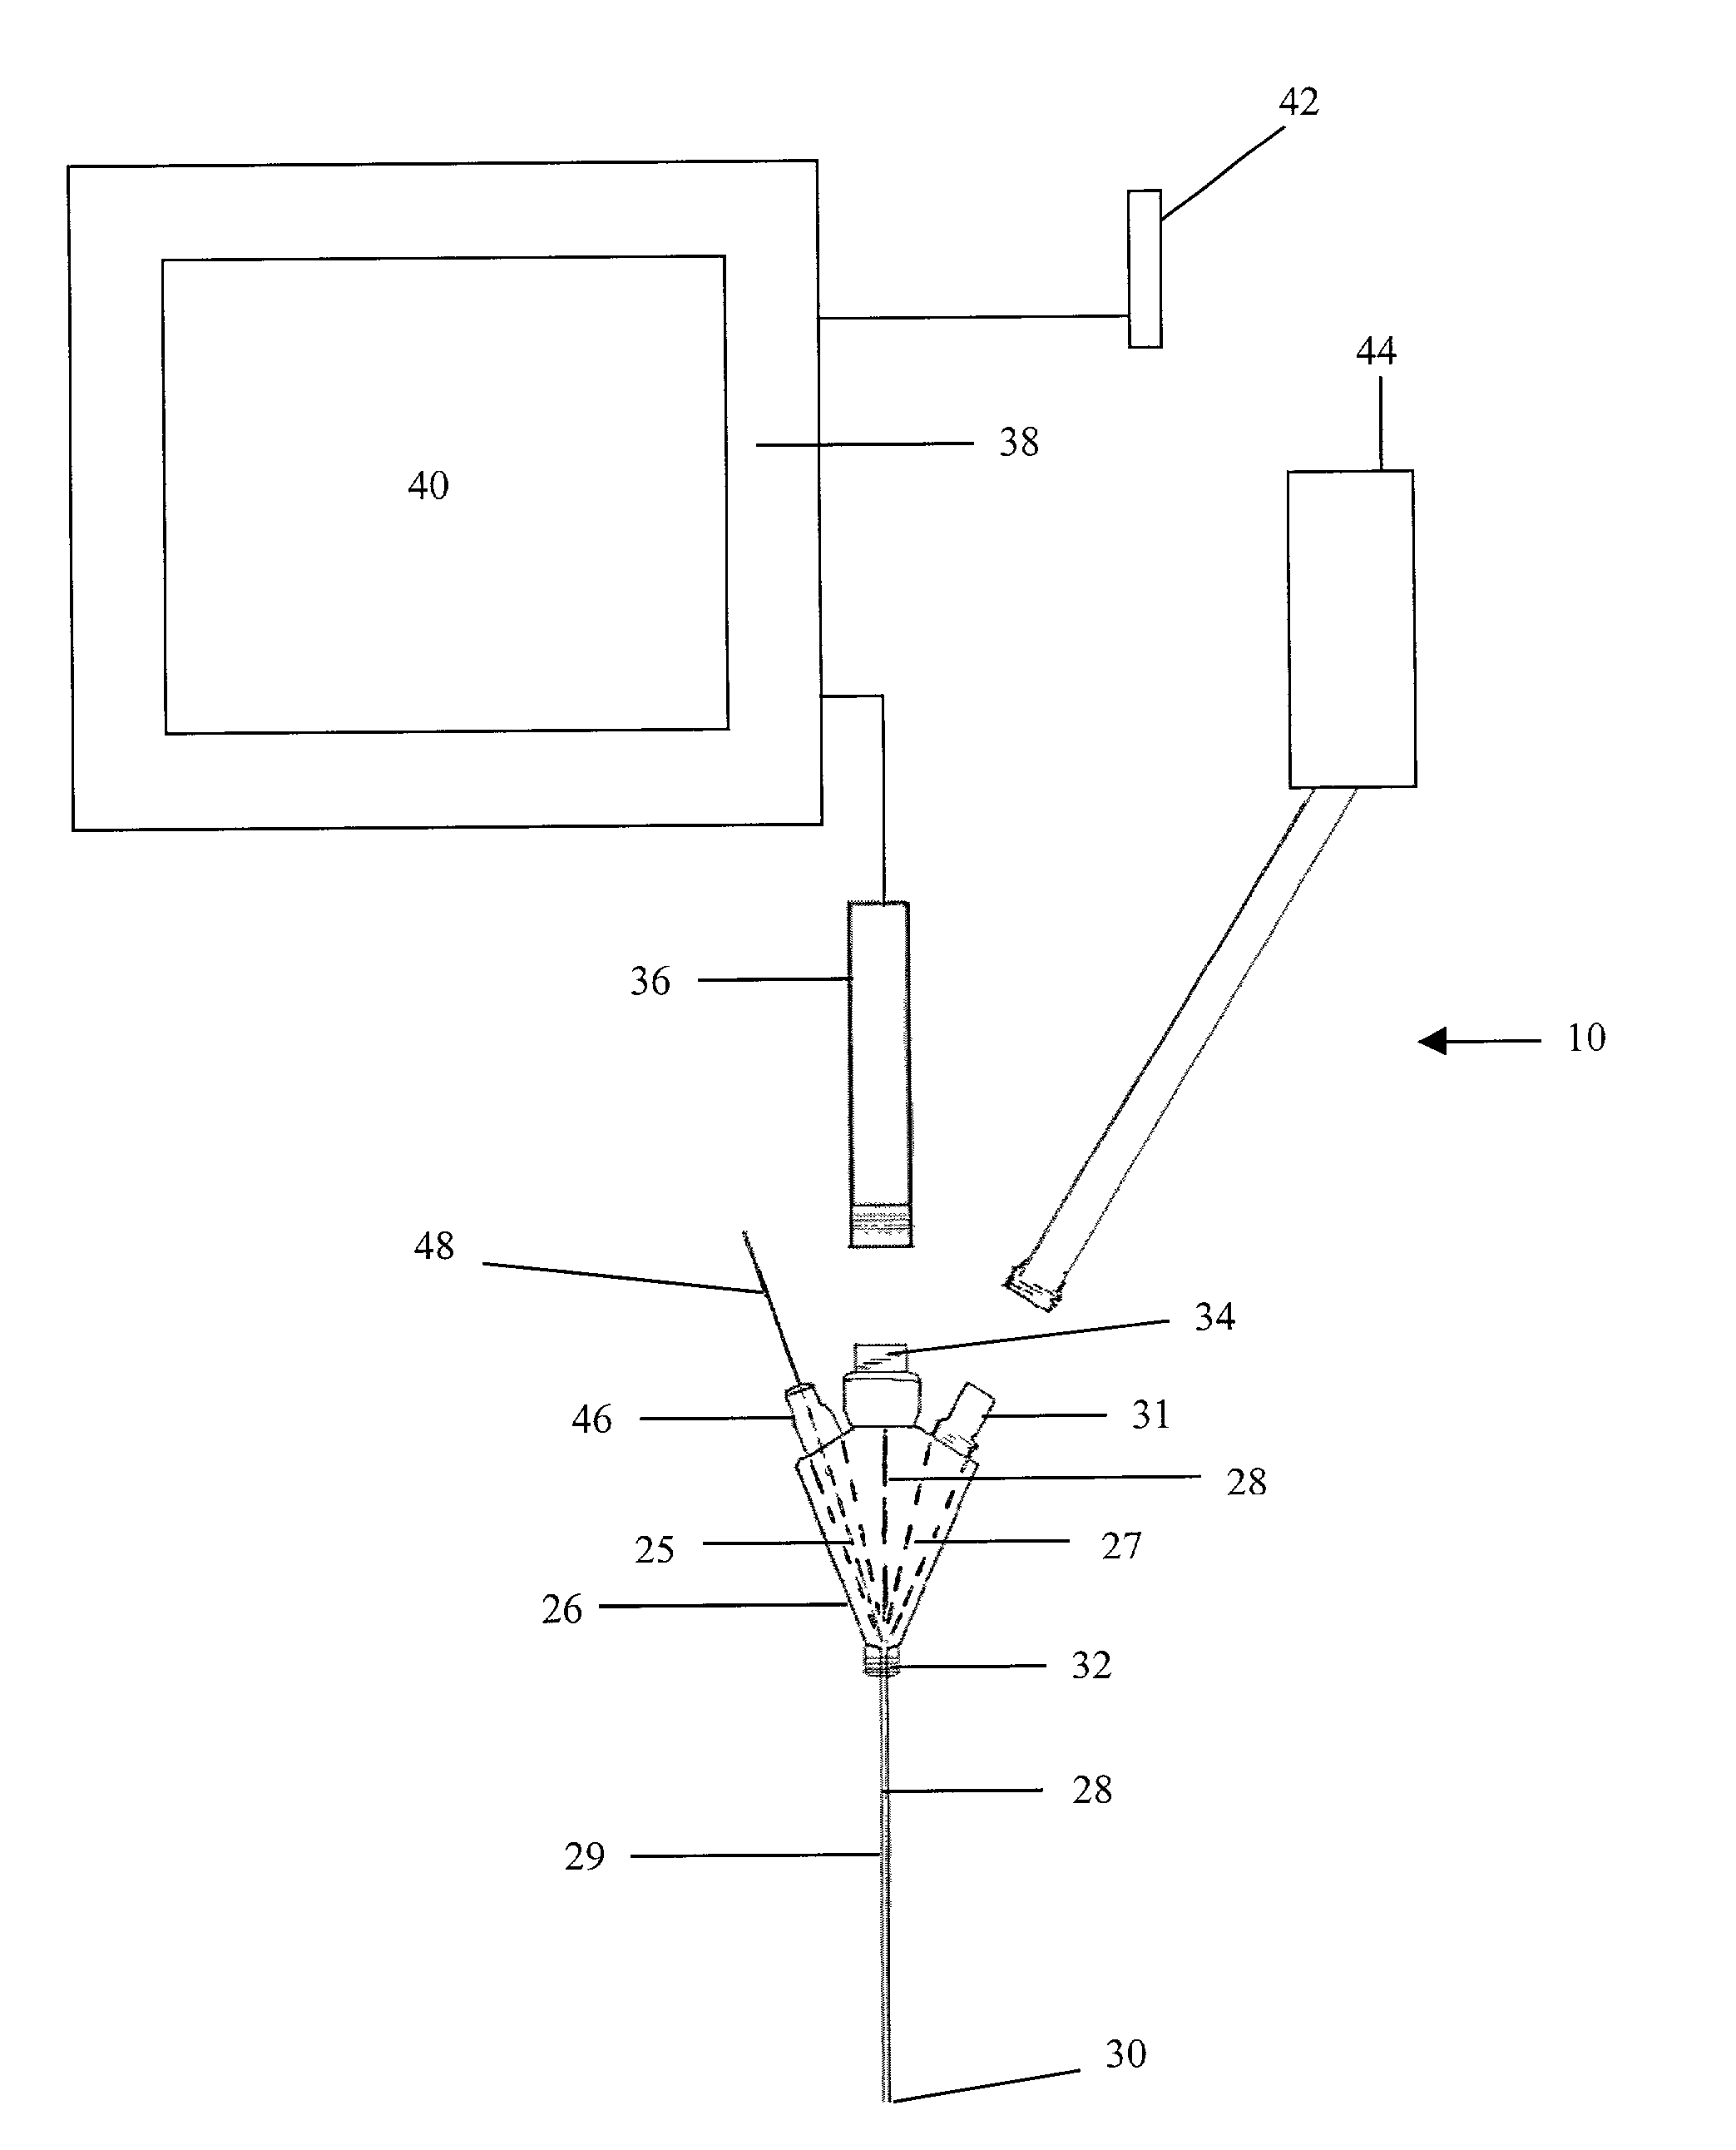 Apparatus and method of use for identifying and monitoring women at risk of developing ovarian surface epithelium derived carcinomas